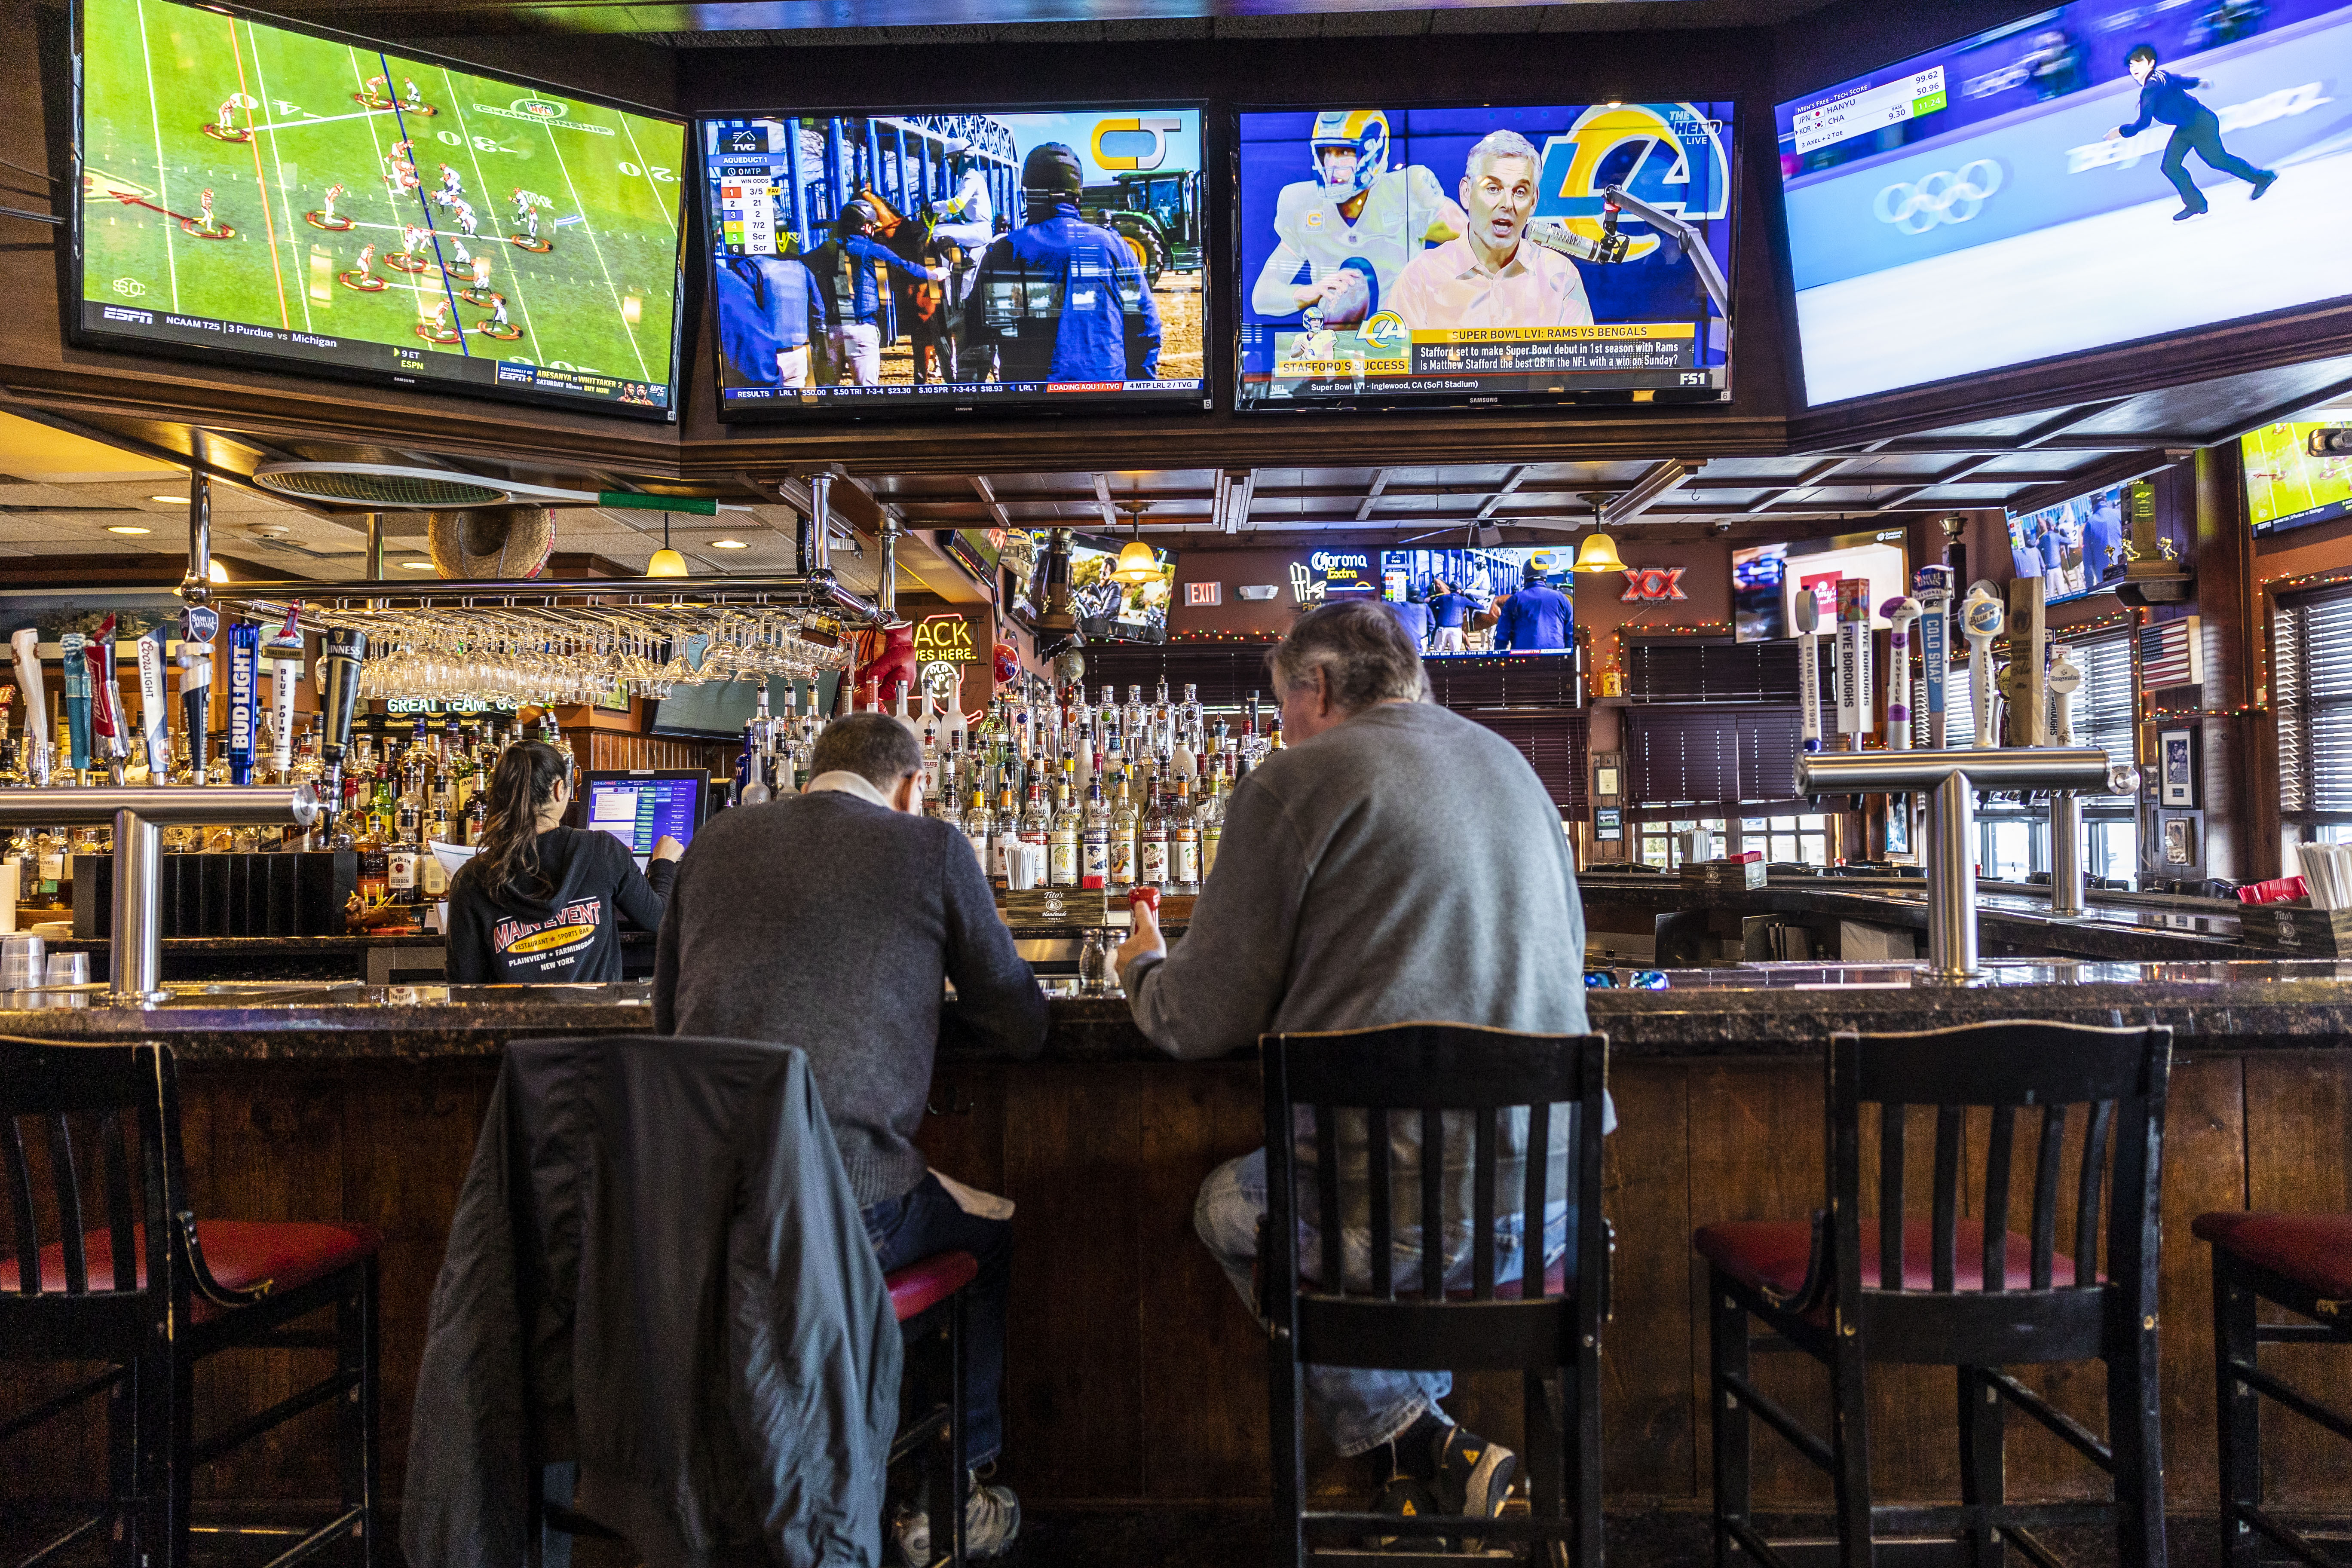 Two patrons sit at a Long Island bar/restaurant that features several screens showing different sports.